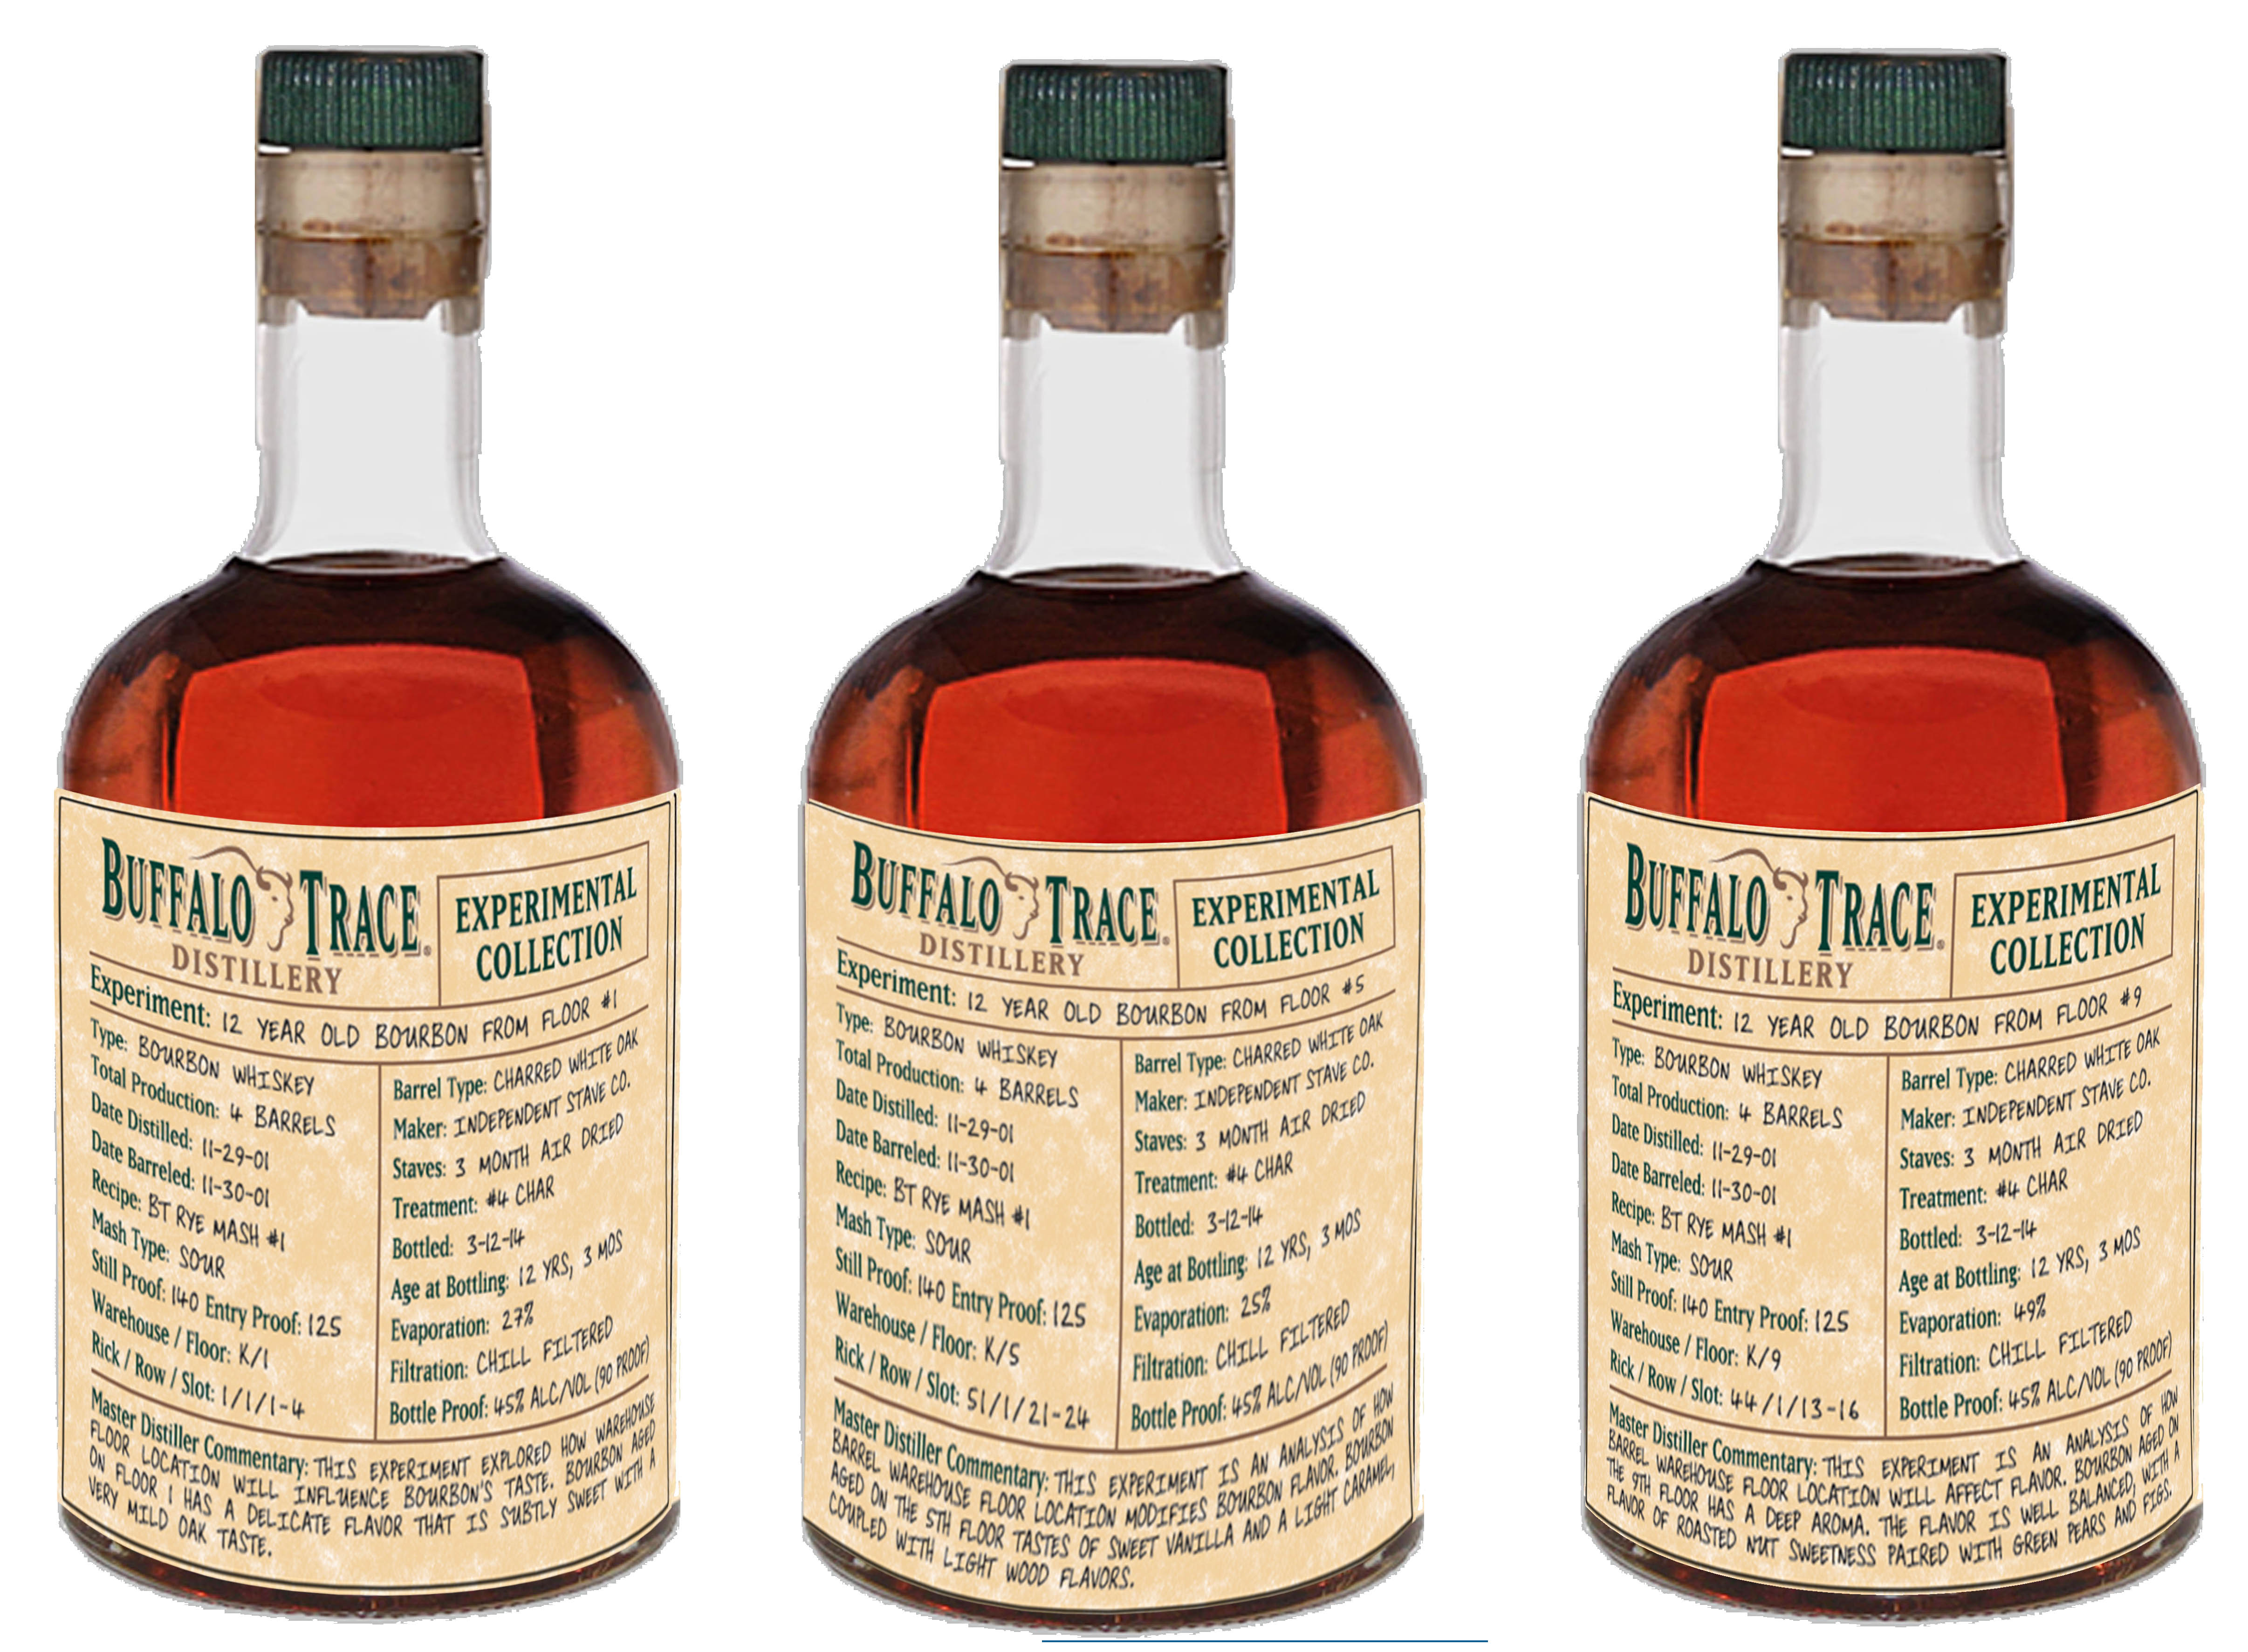 Buffalo Trace Experimental Collection 12 Year Old Rye Bourbon - Floor #1